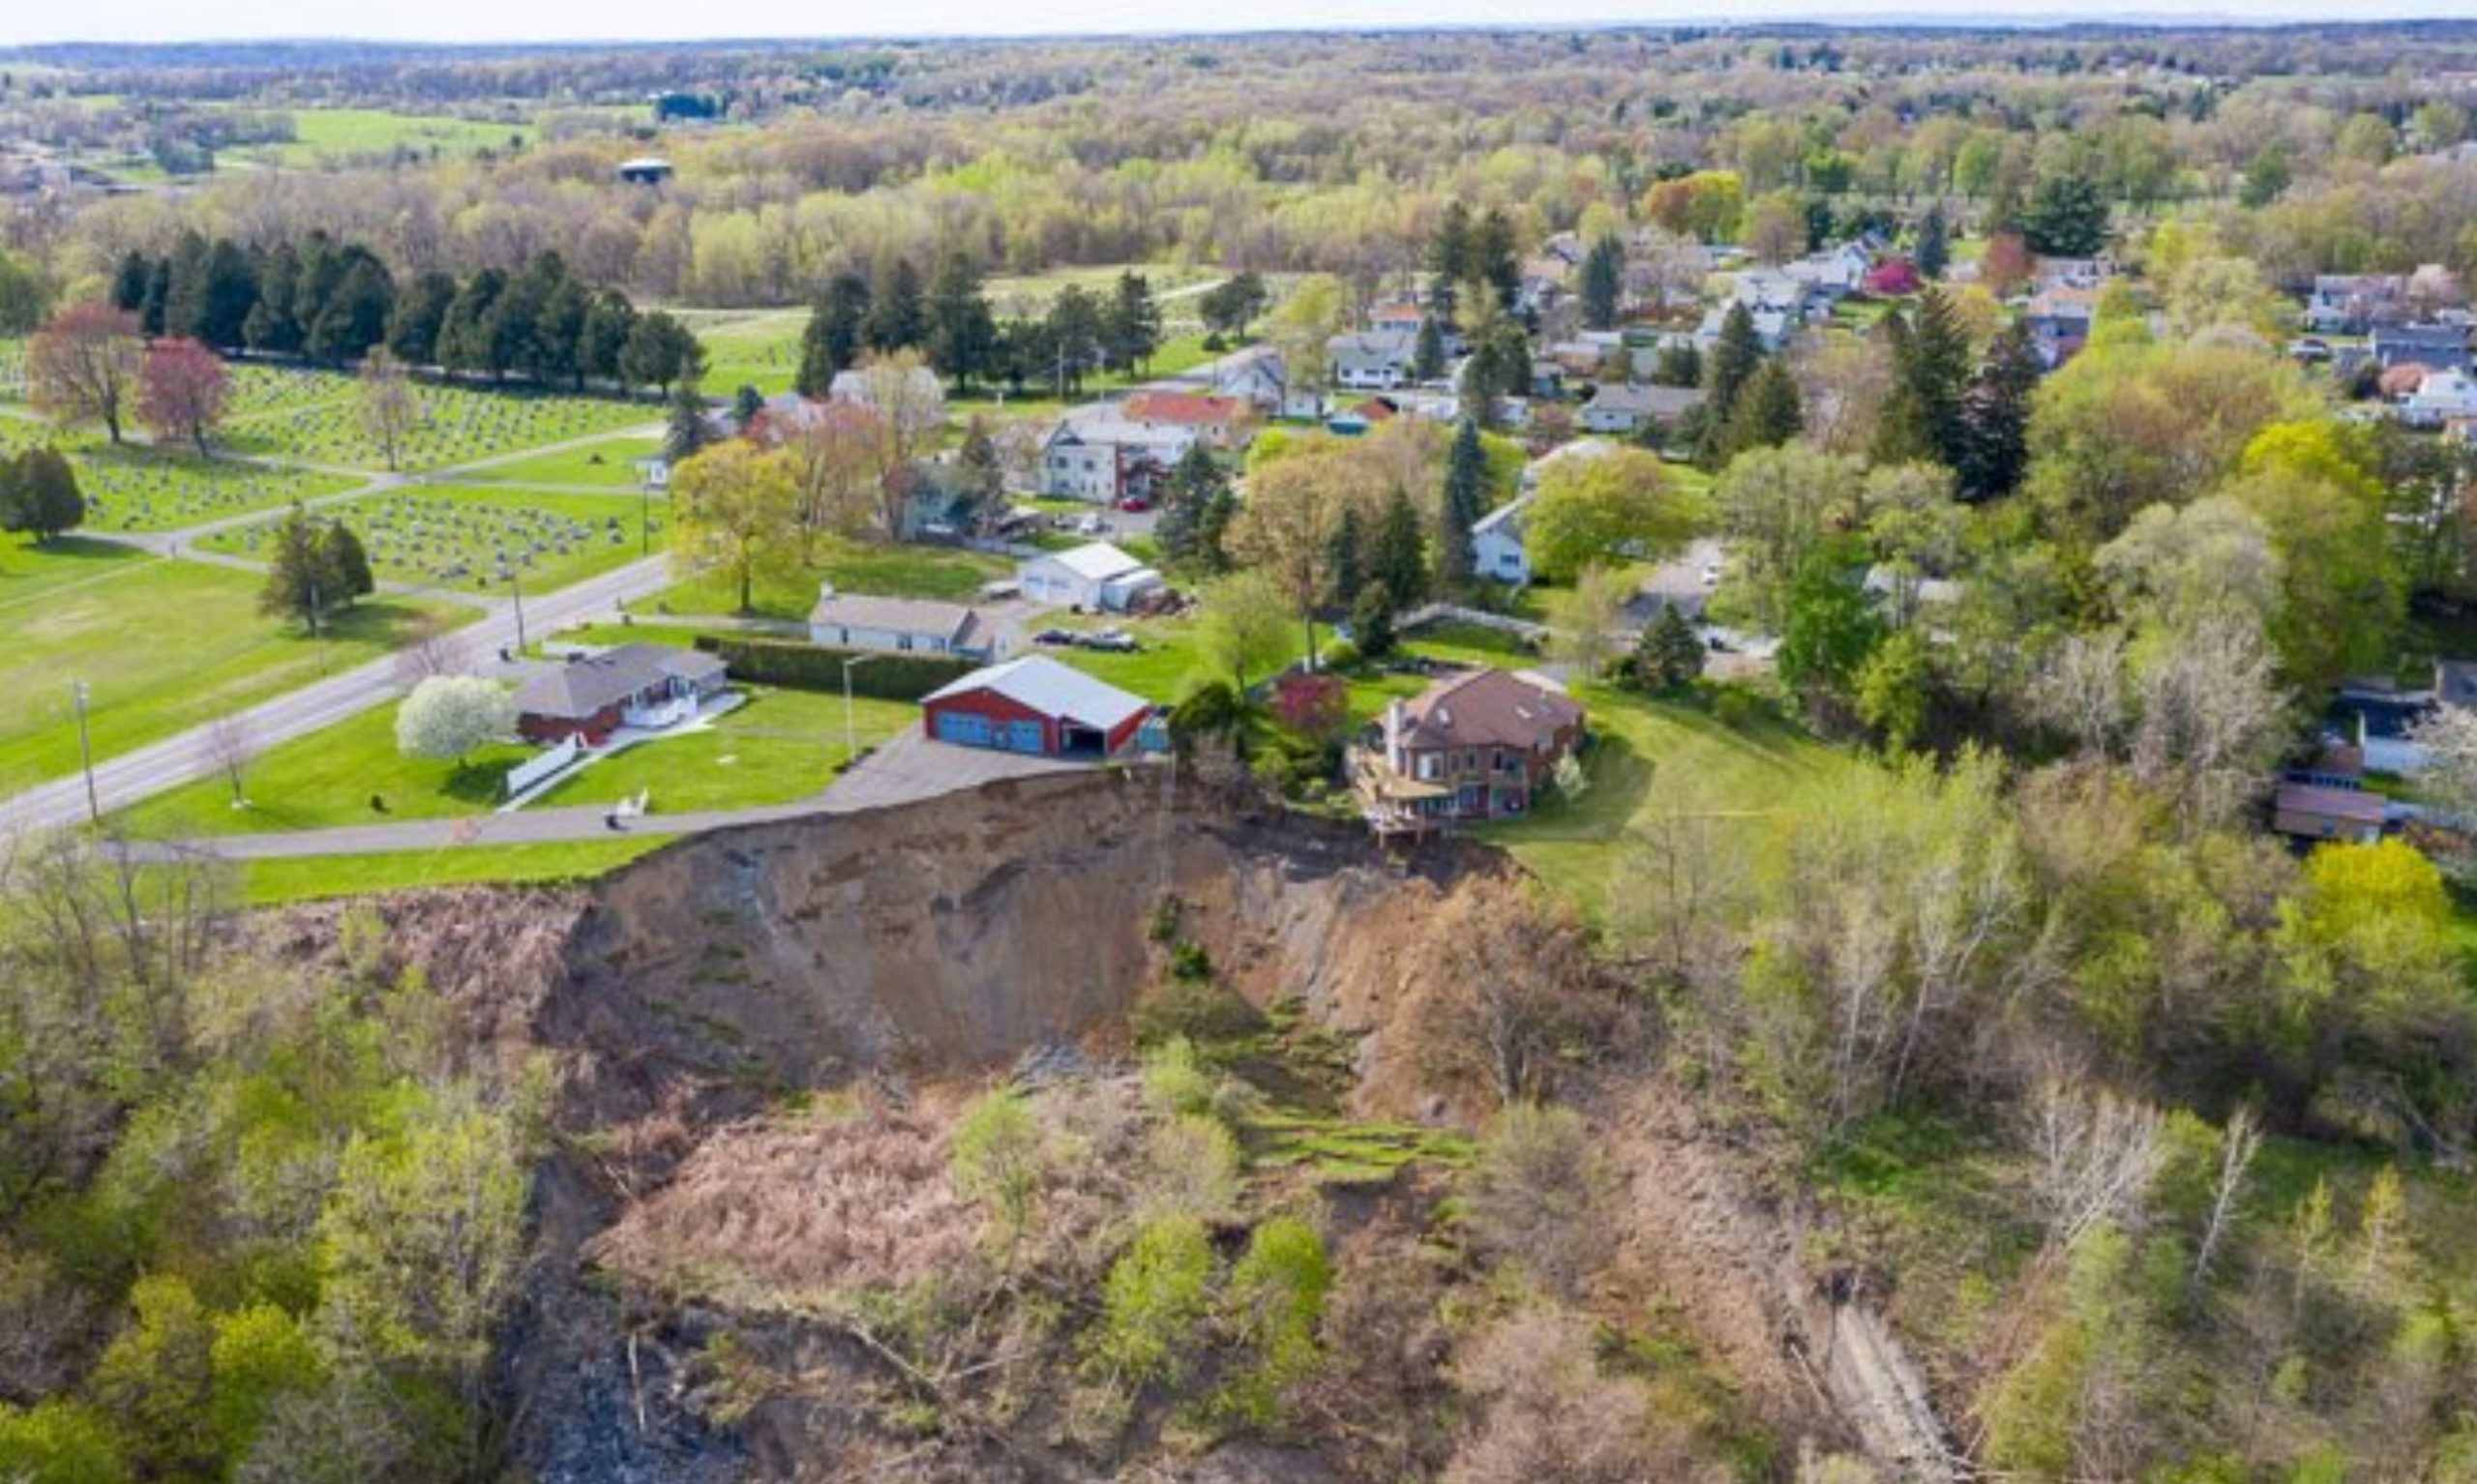 The landslide at Waterford in New York